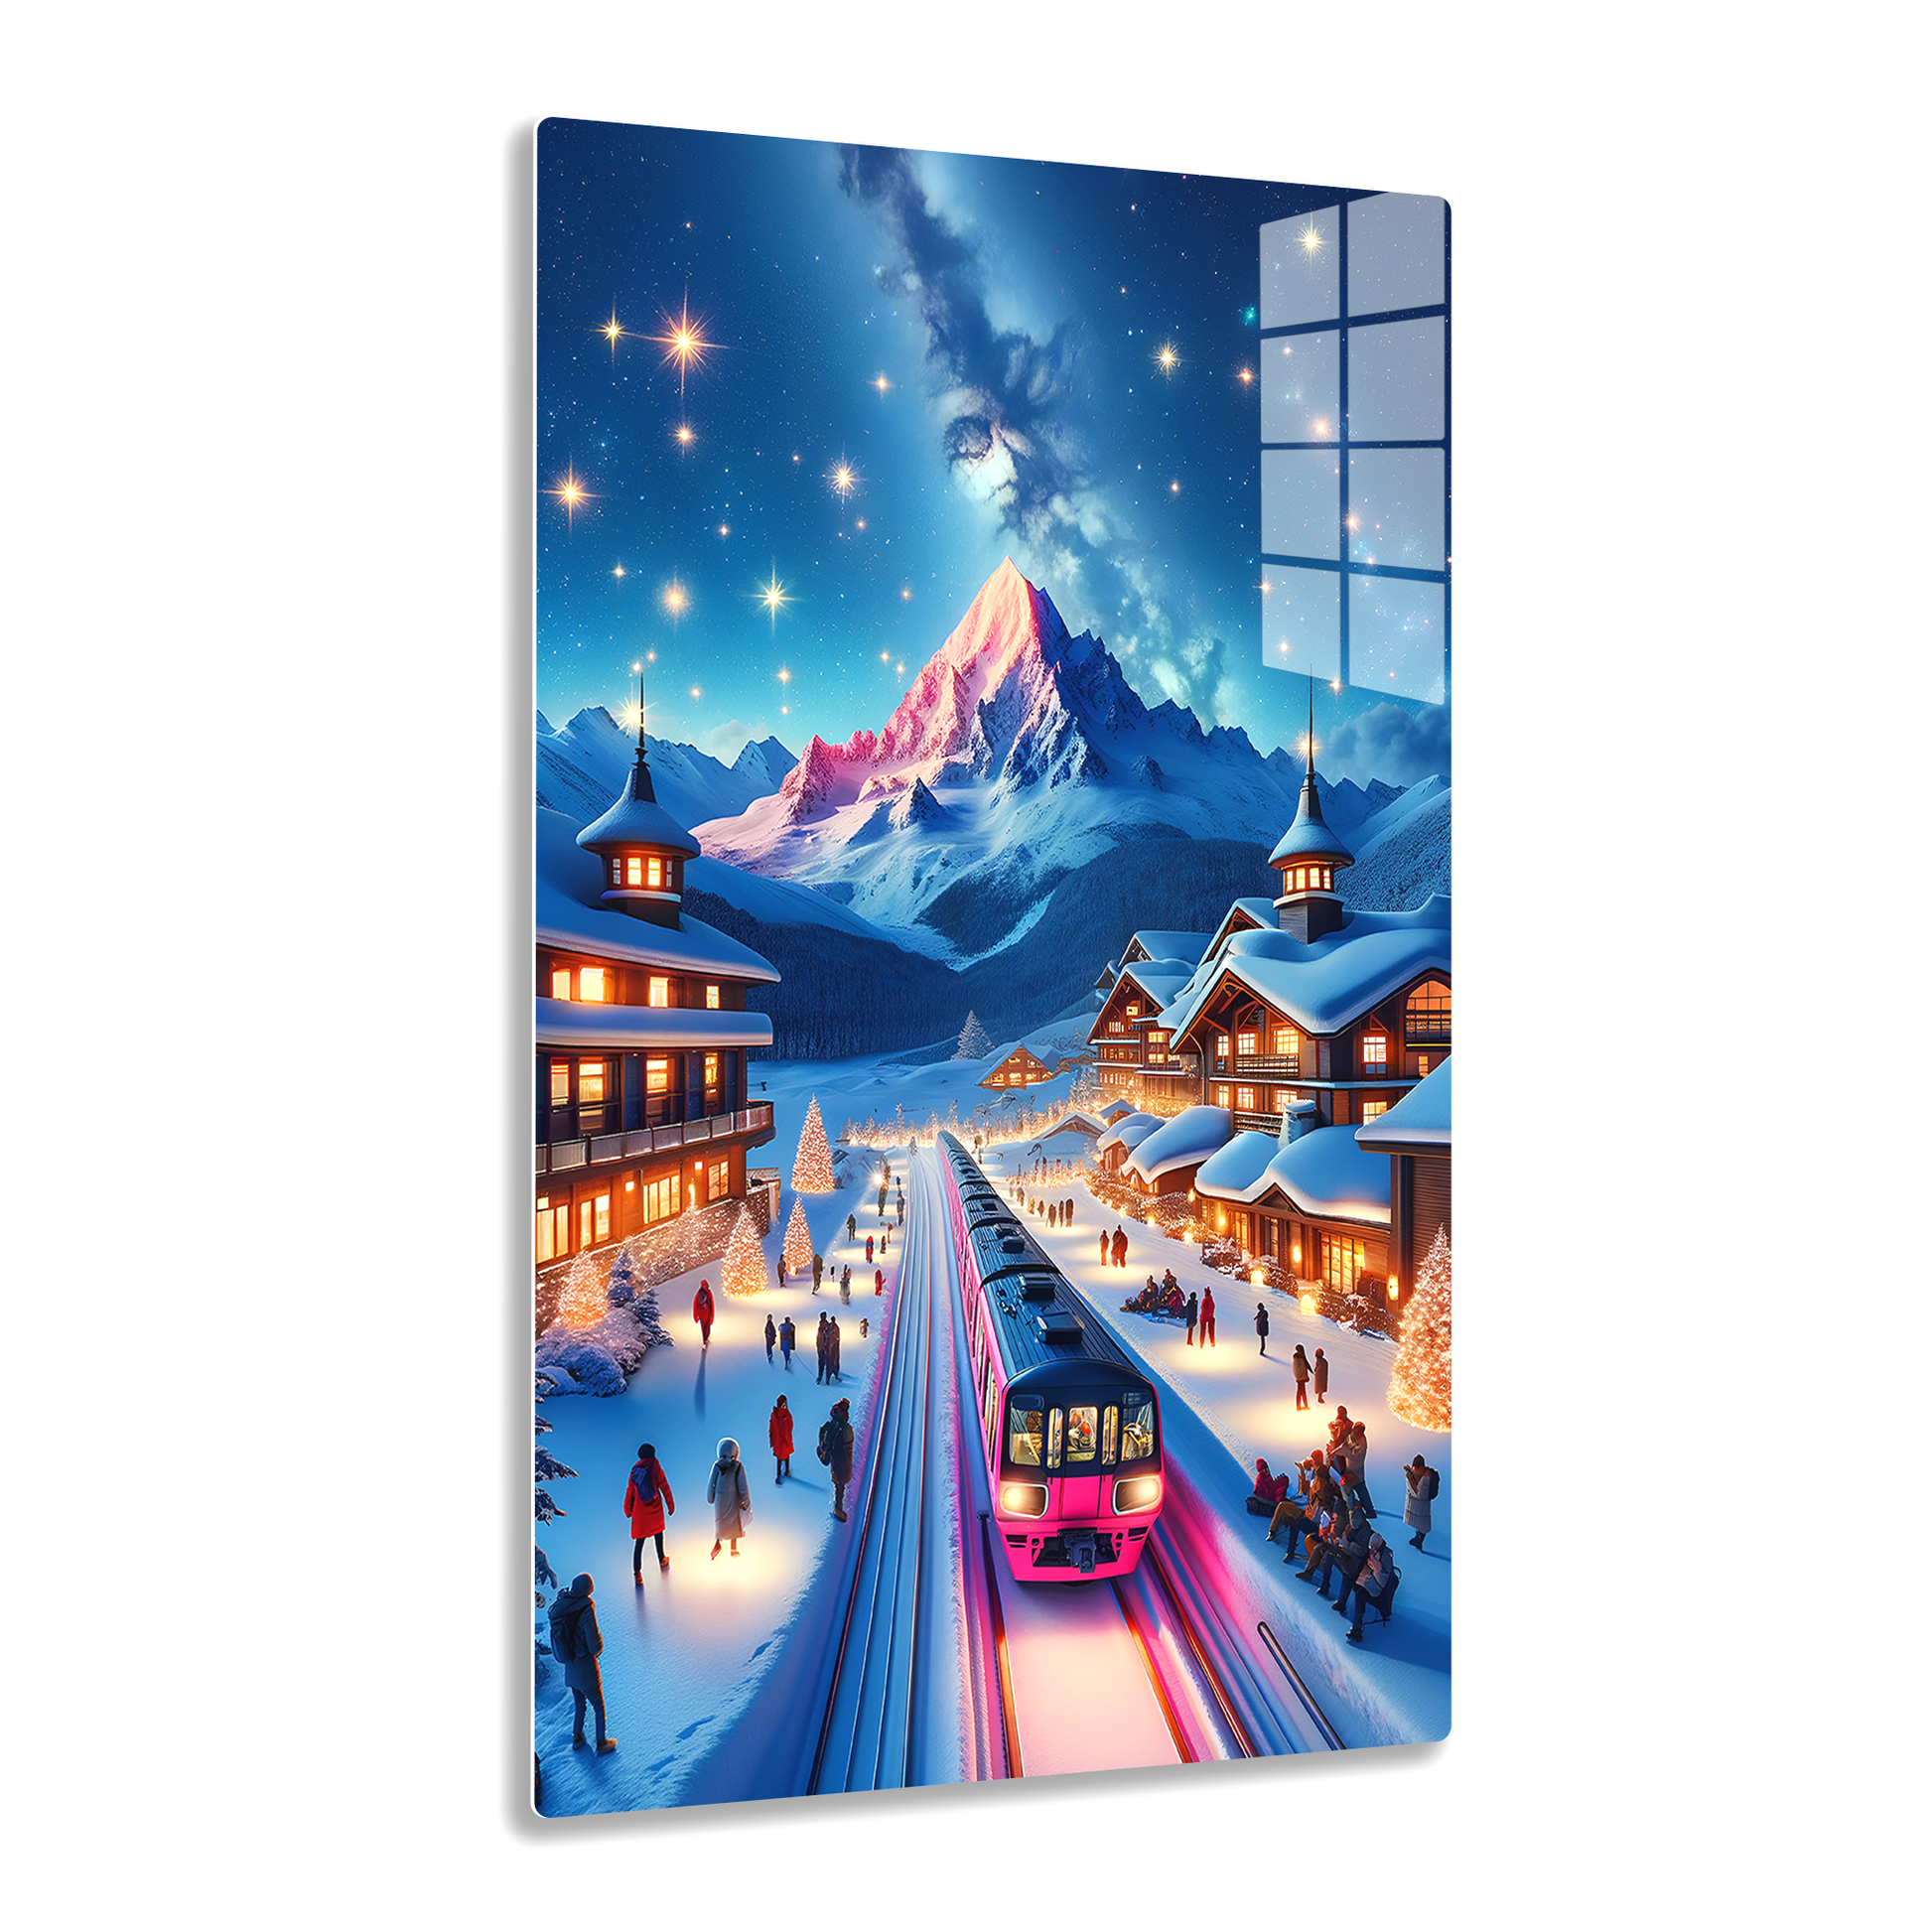 Starry Mountain Eve (Acrylic)Make a statement with Starry Mountain Eve acrylic prints. The 1⁄4" acrylic panel exudes the illusion of a smooth glass surface for vibrant artwork. Pre-installed hanRimaGallery